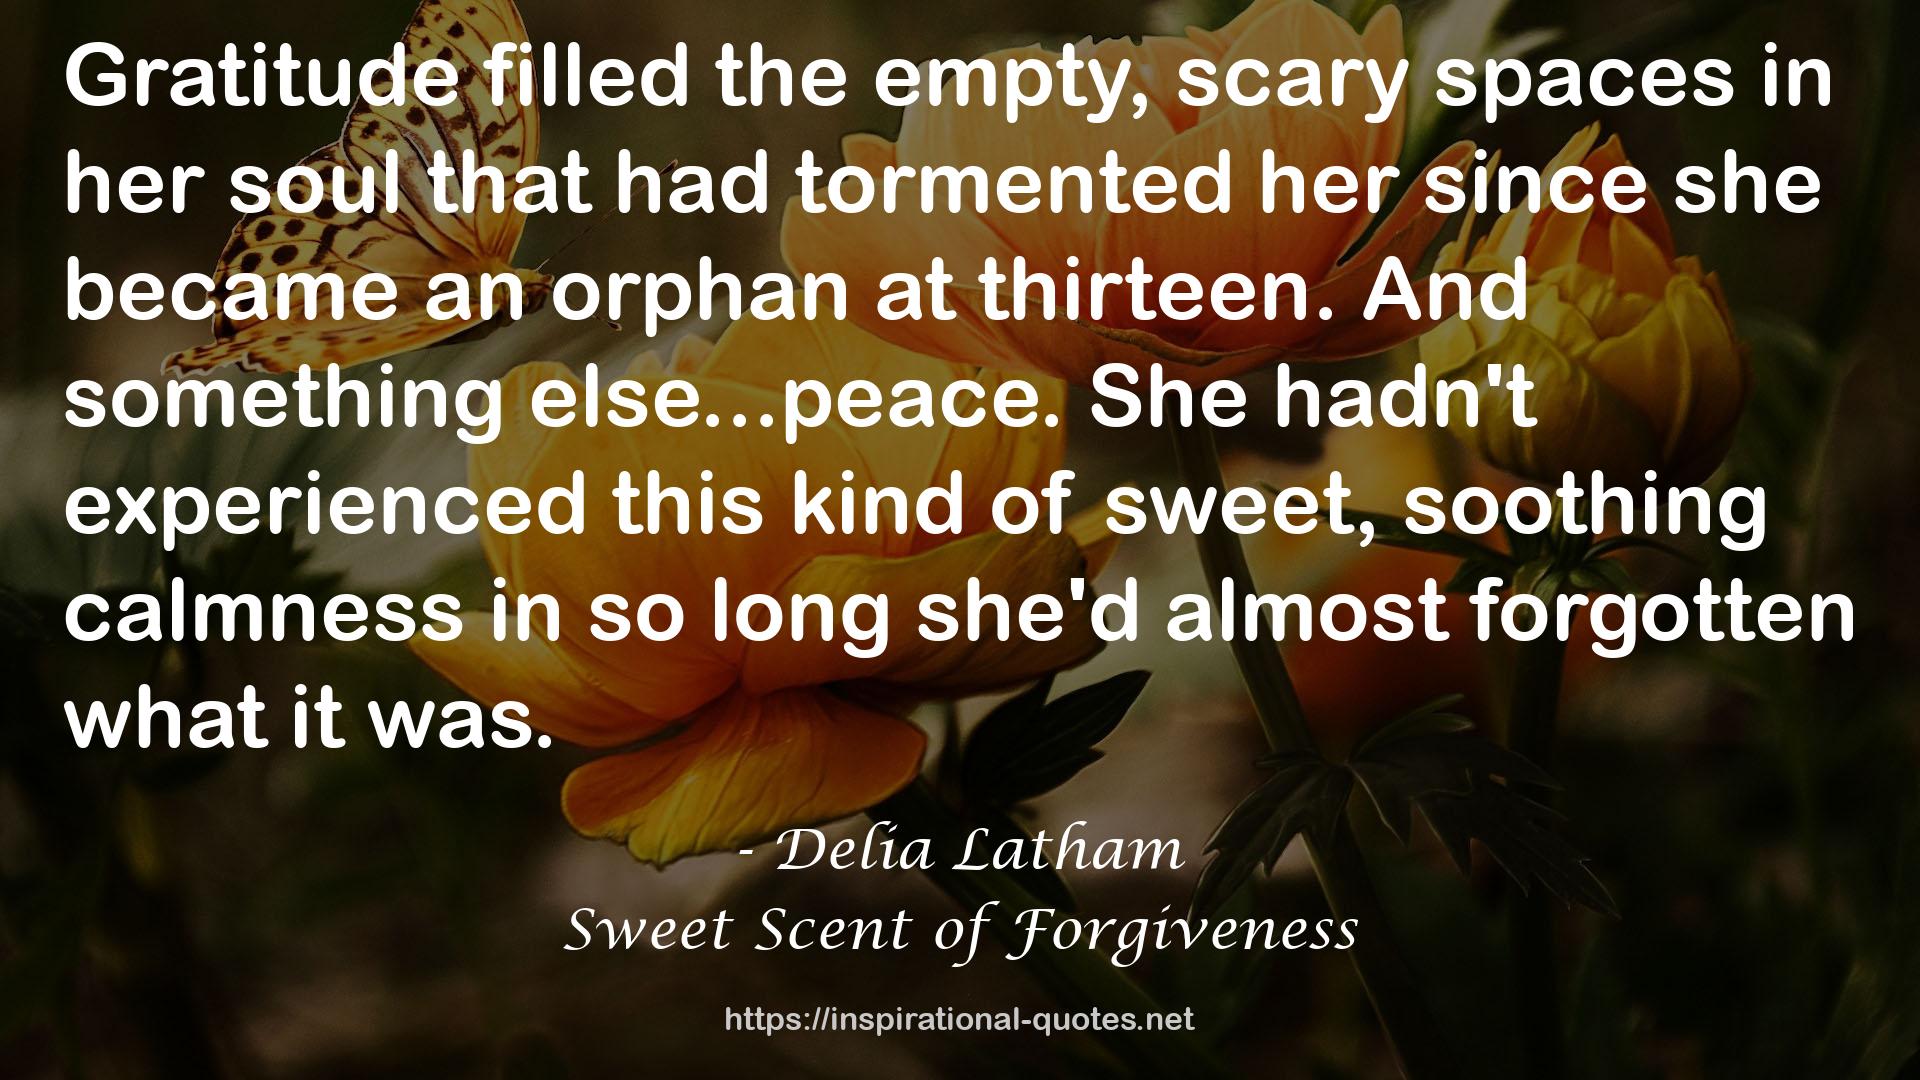 Sweet Scent of Forgiveness QUOTES